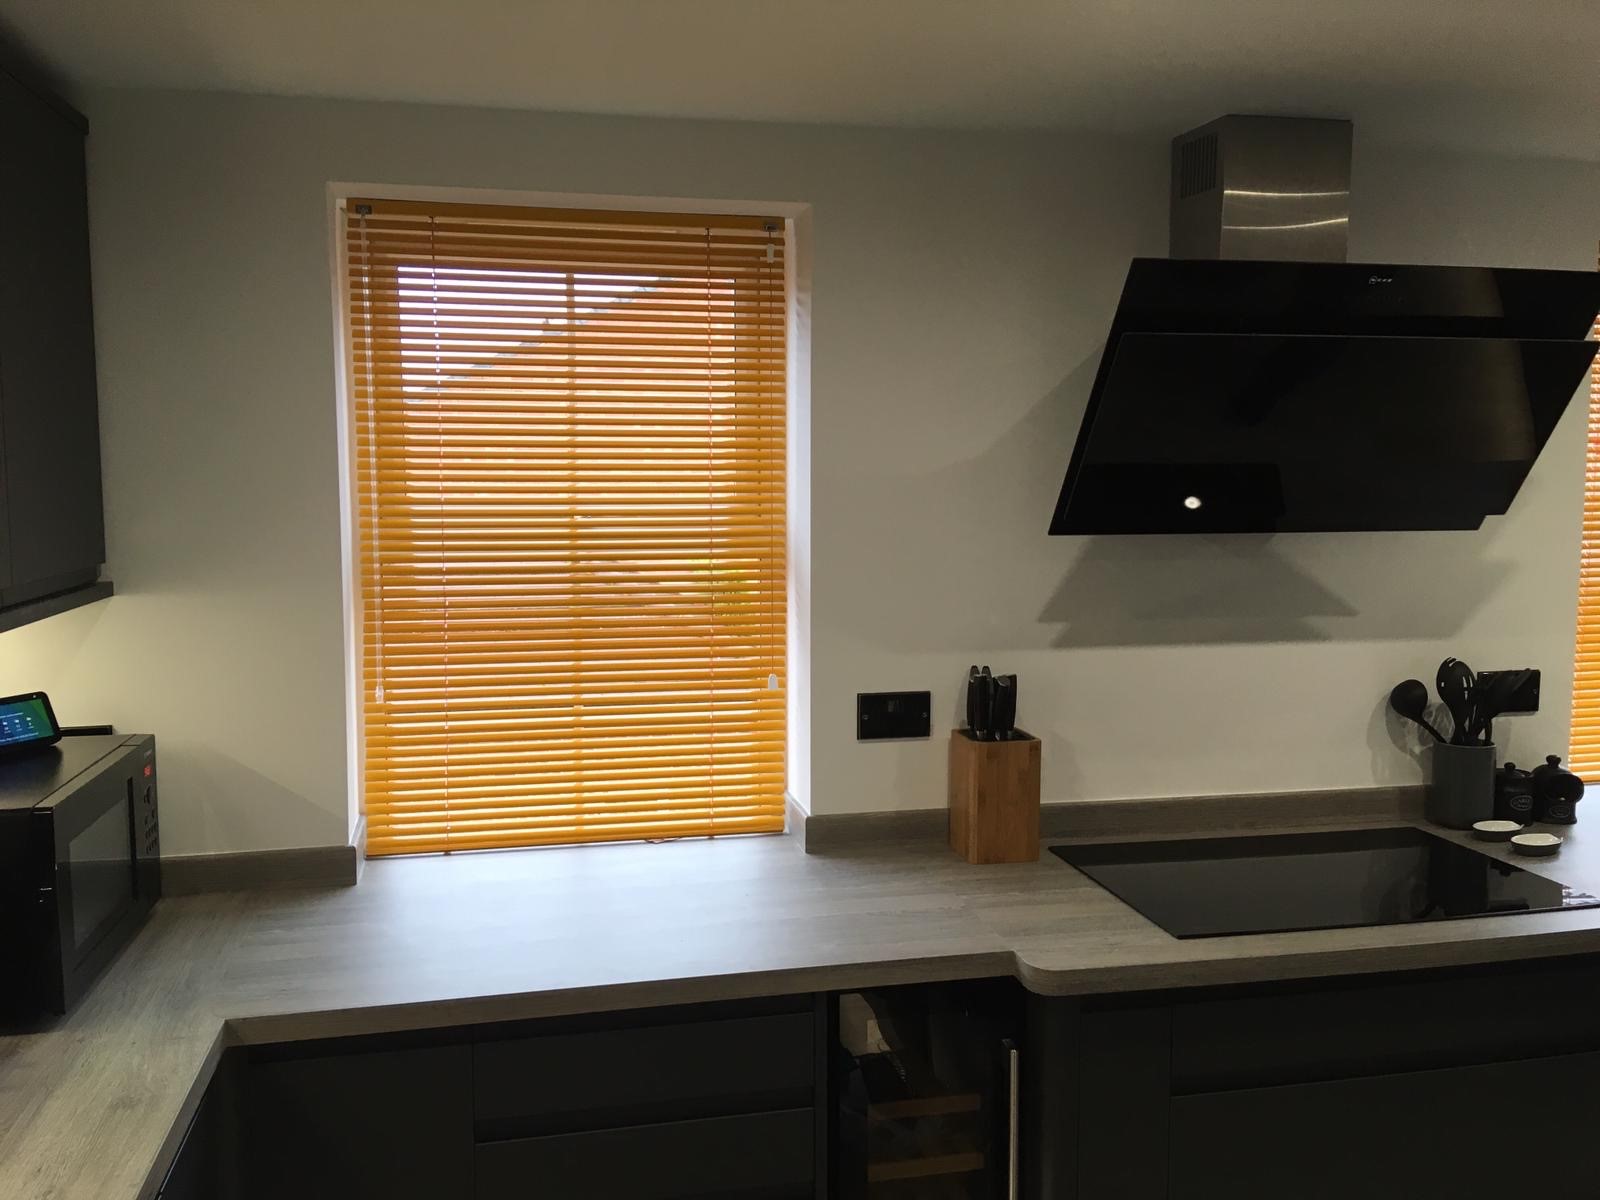 Suppliers of Aluminium Blinds For Kitchens